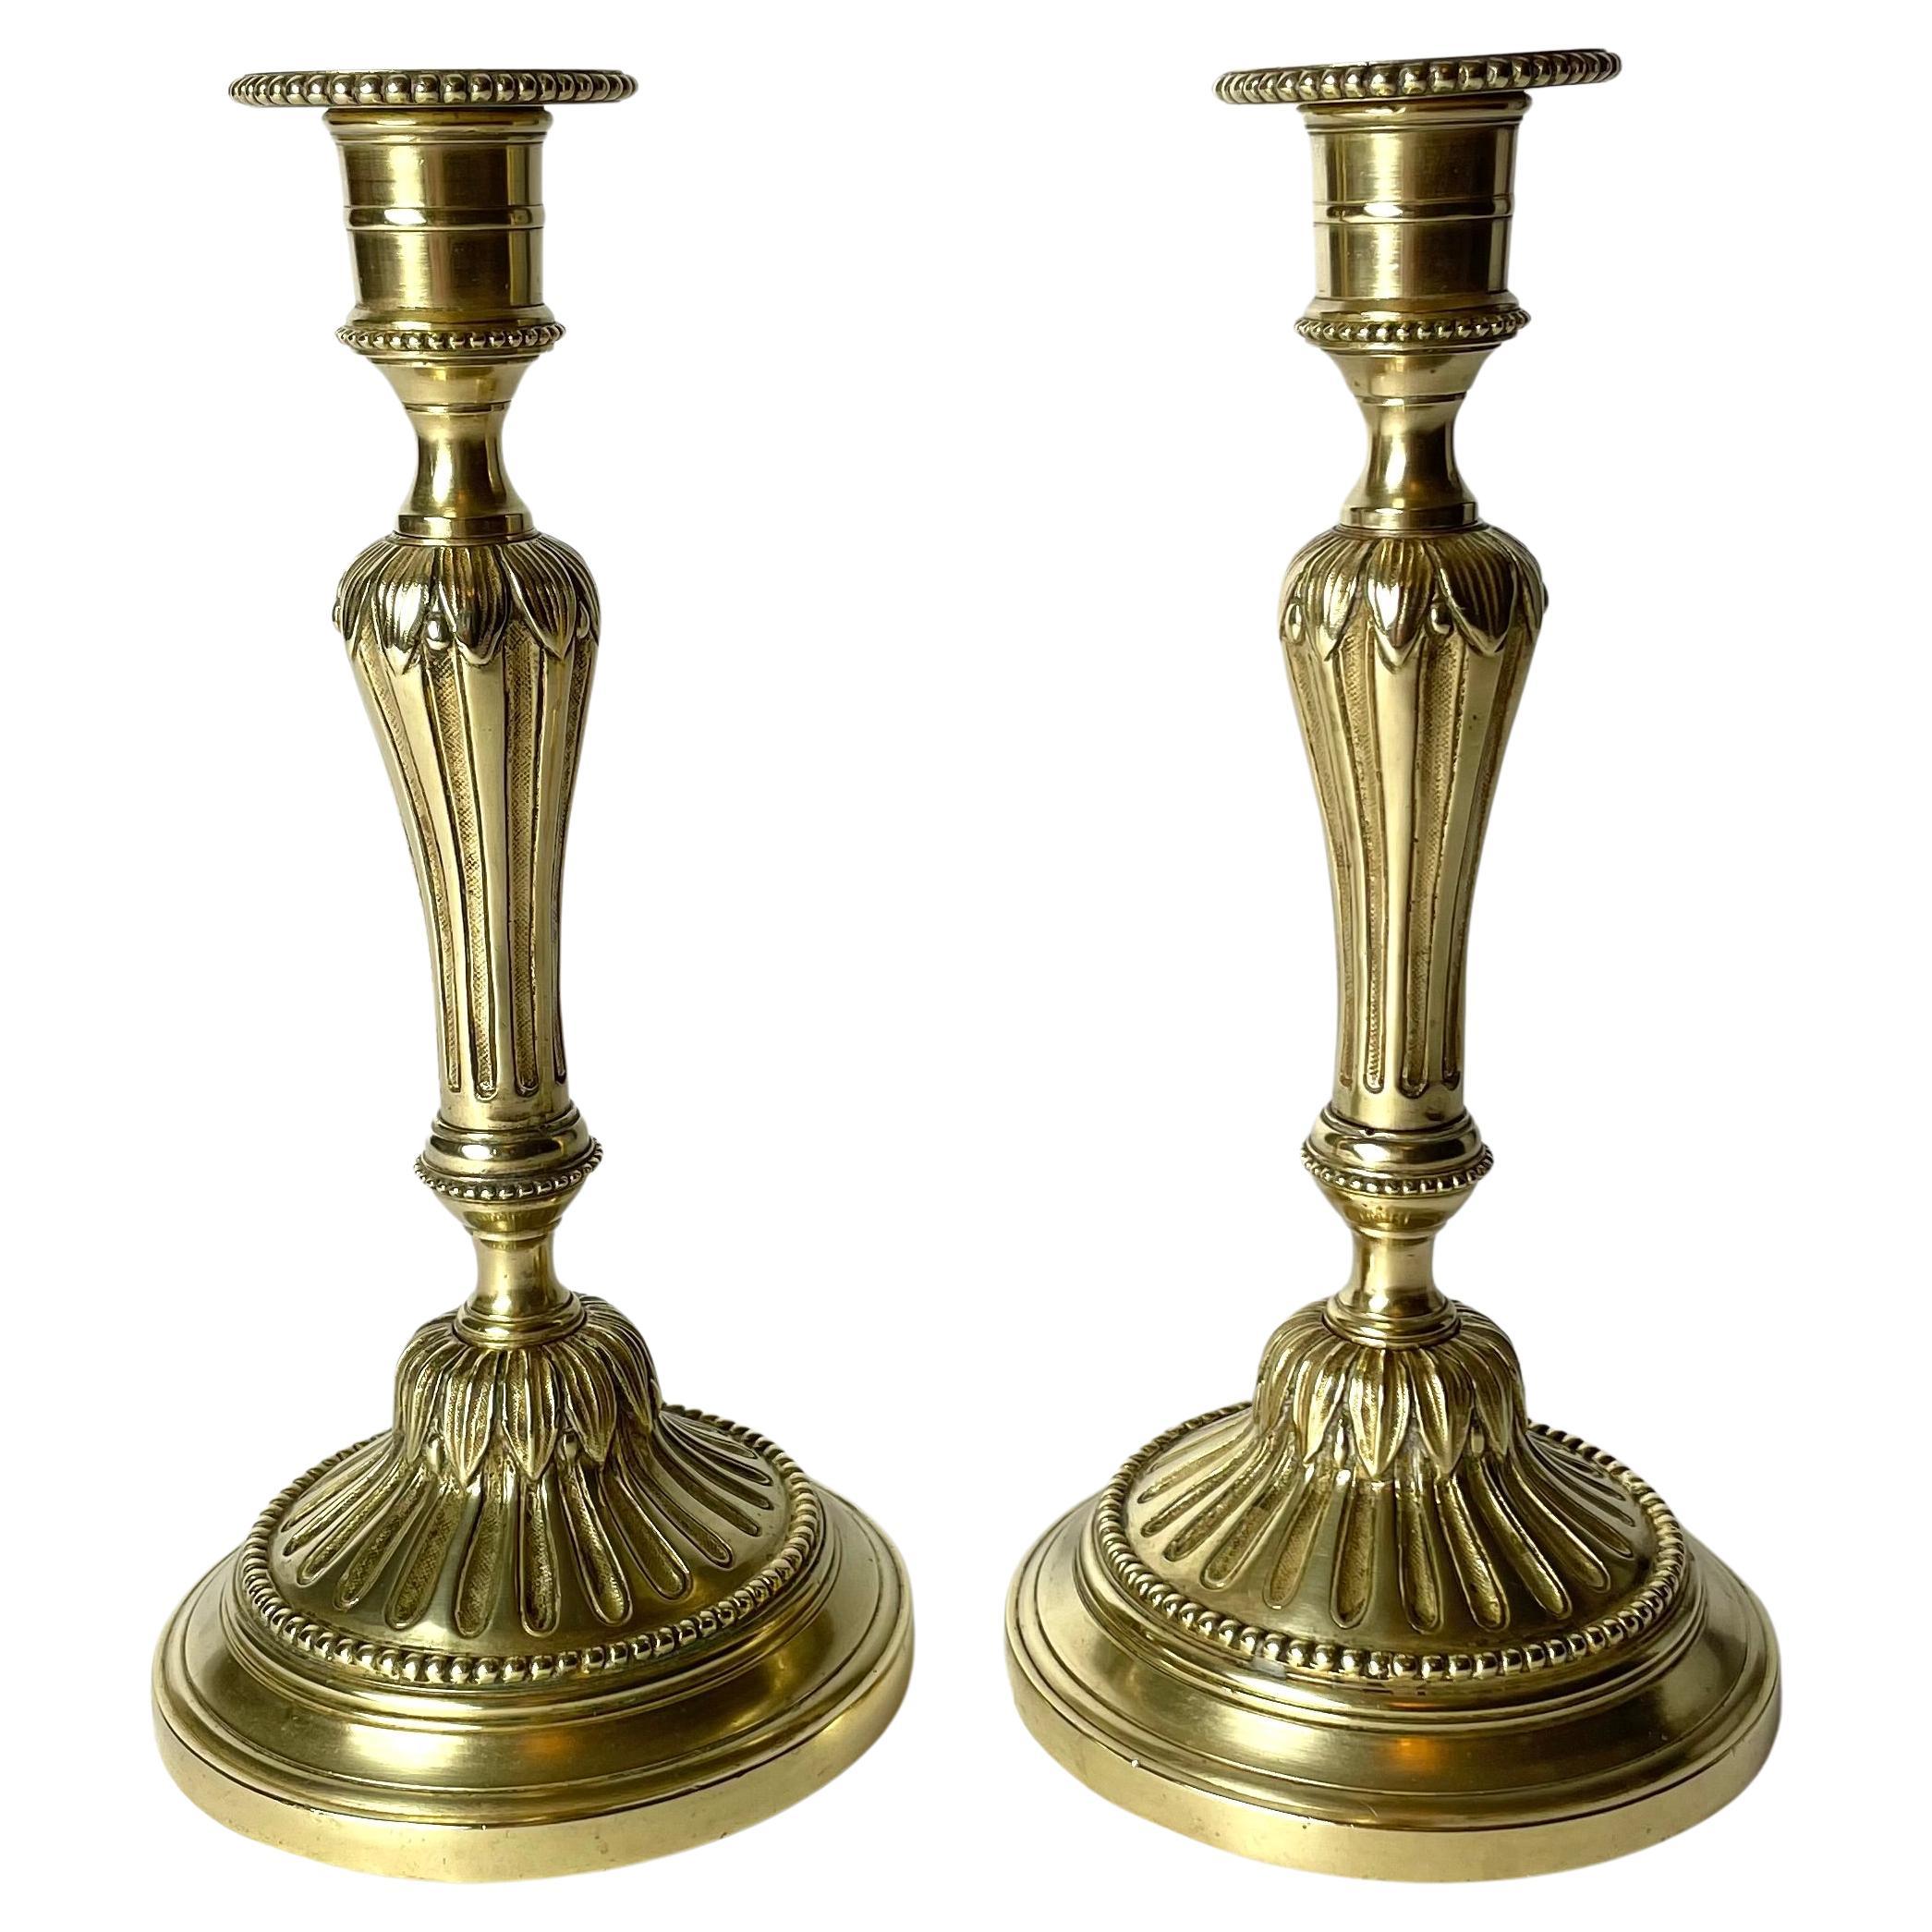 A Pair of Candlesticks in brass, early 20th Century, in the style of Louis XVI